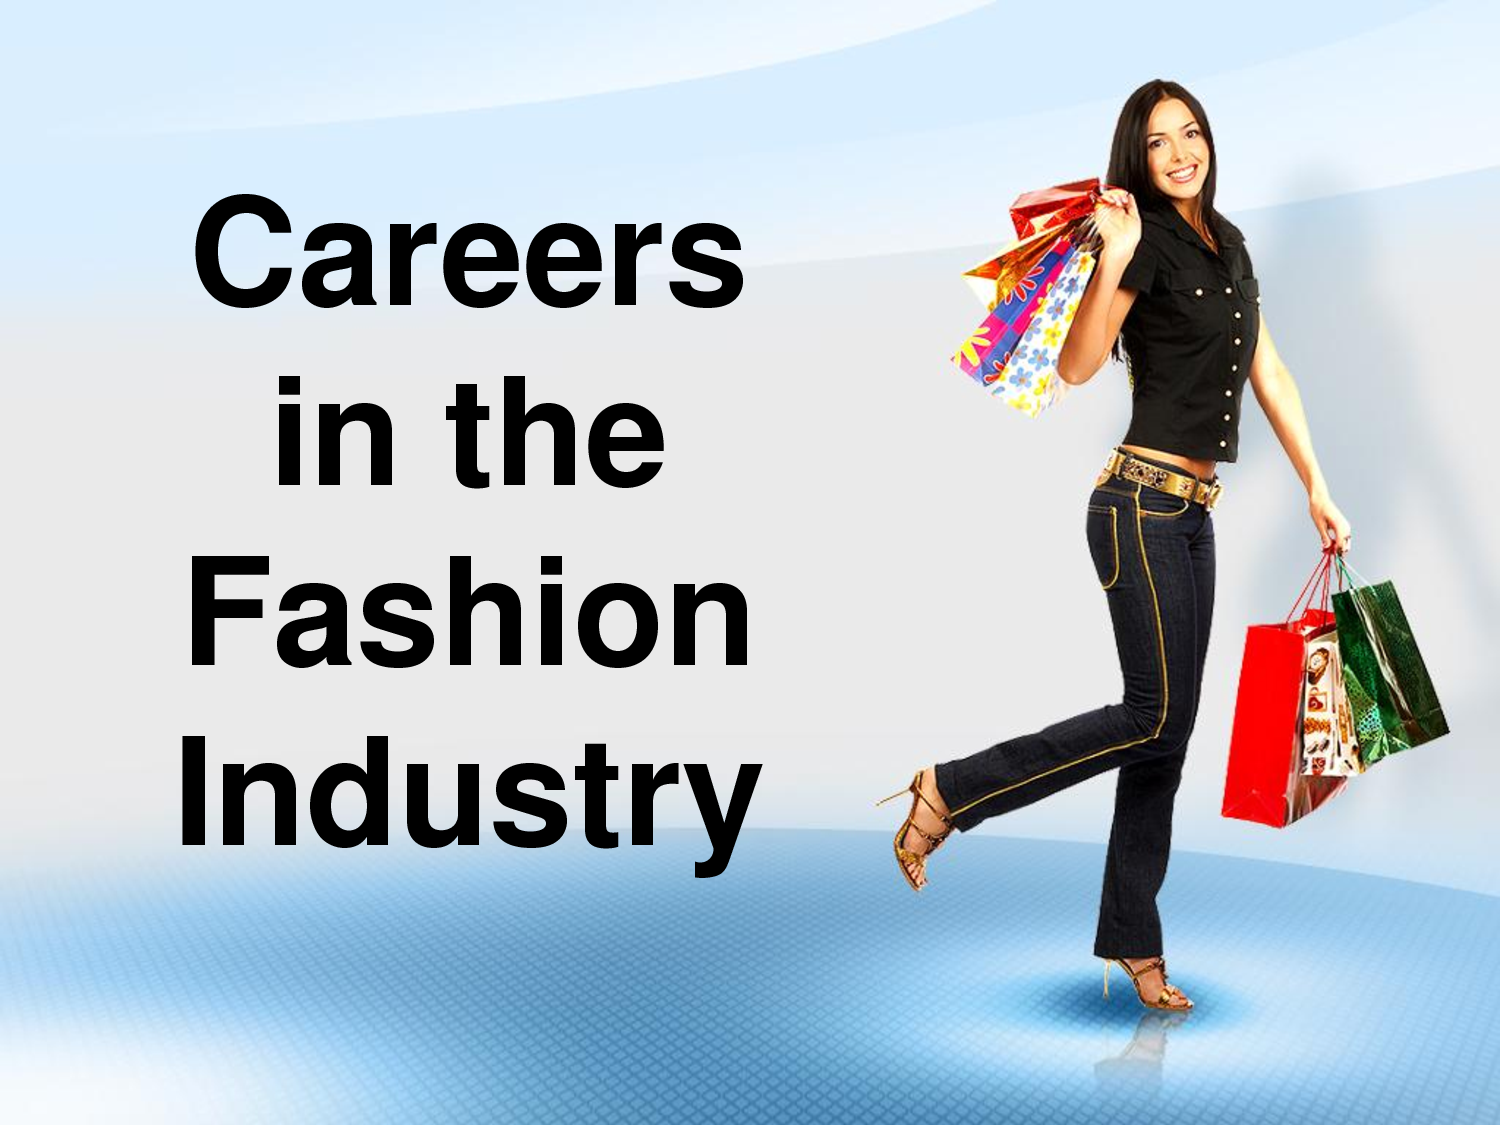 Creative jobs in the fashion industry